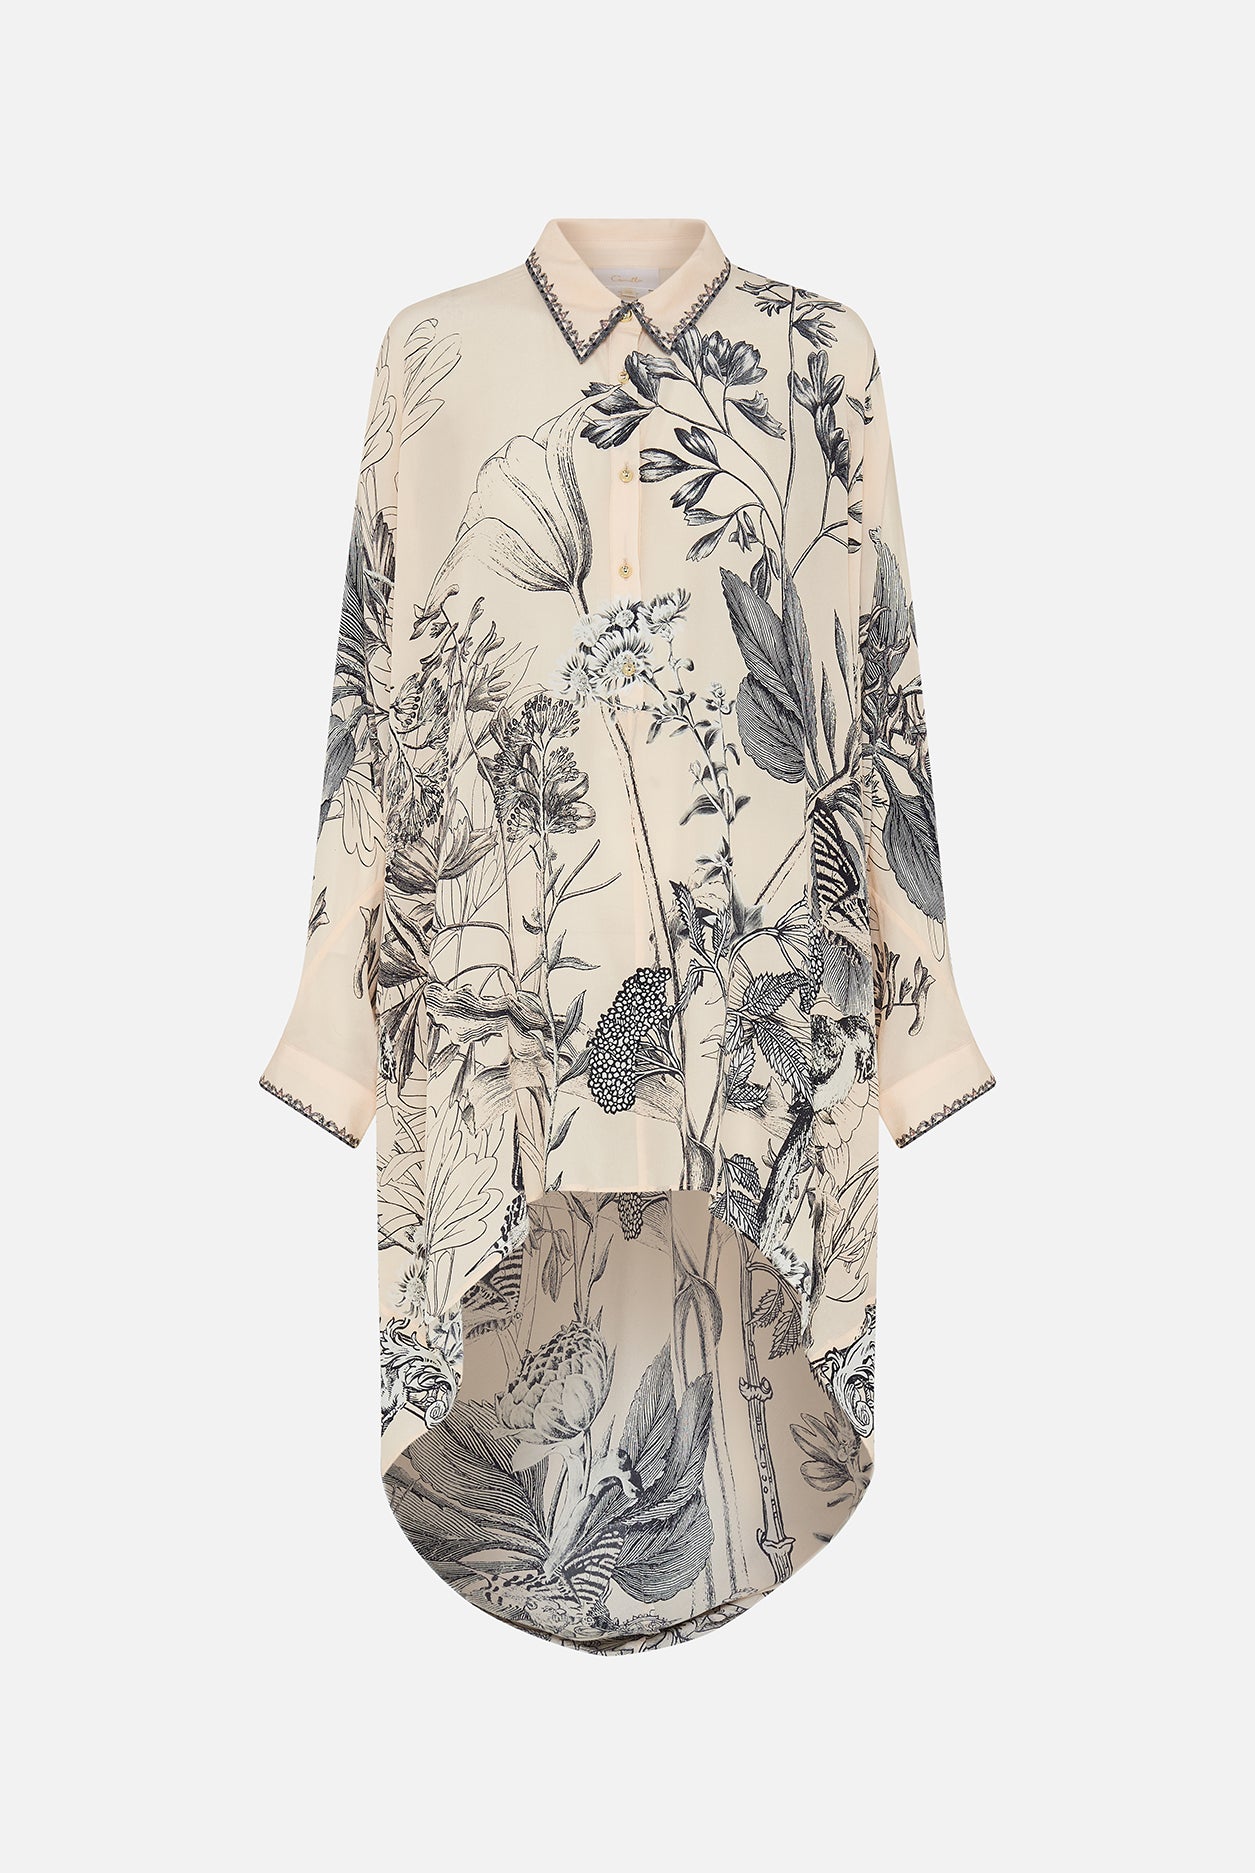 CAMILLA - Button Up Top with Draped Back Etched into Eternity - Magpie Style